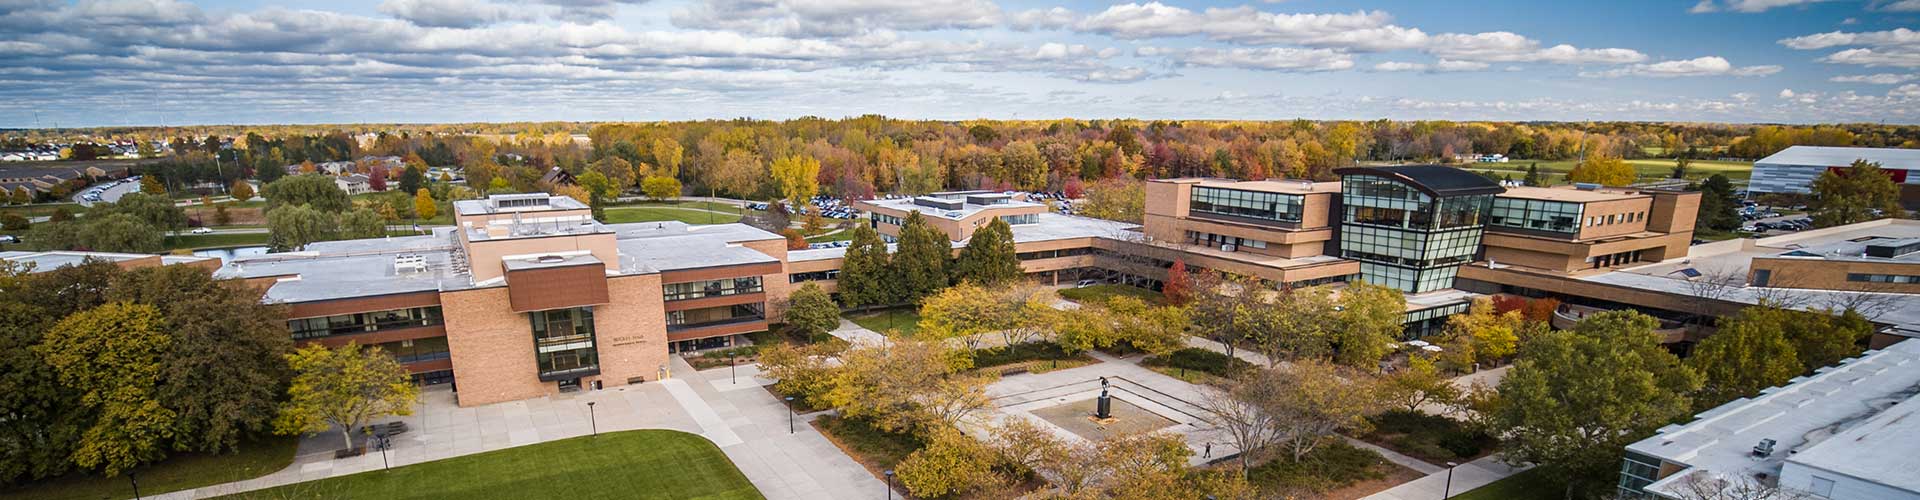 Central campus in the fall